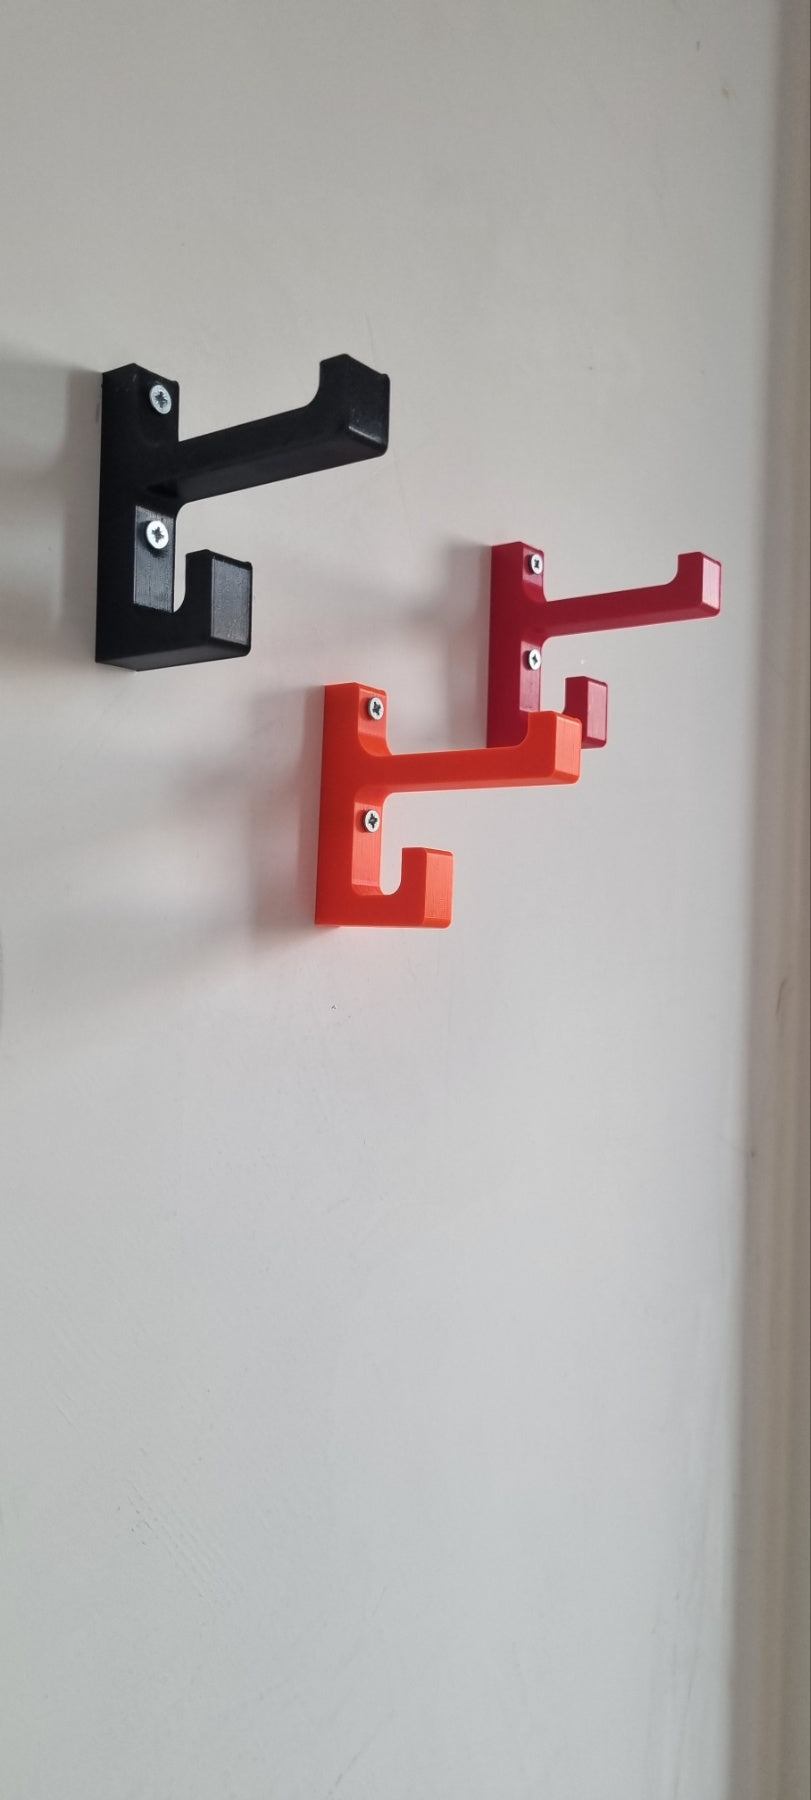 Wall hook Printed in PETG with 30% Infill for Robustness